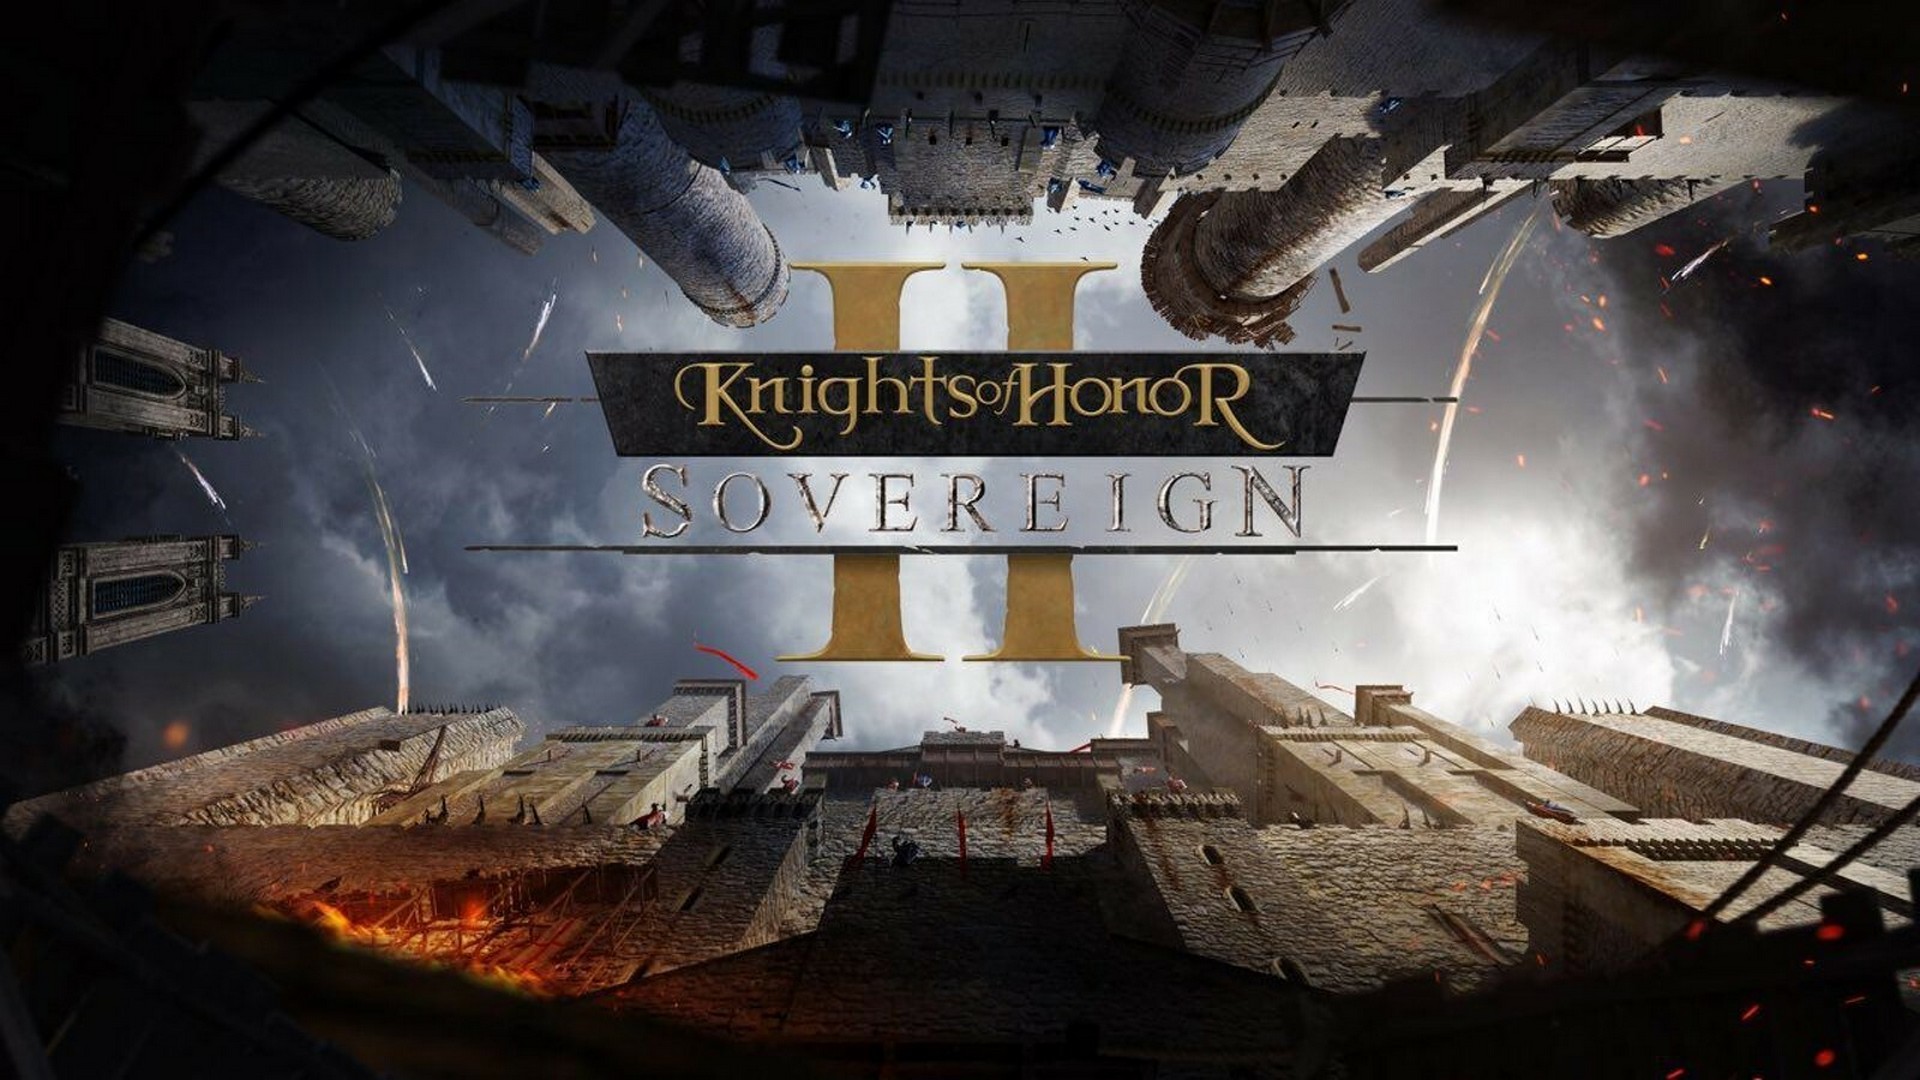 The Scribes Praise You, Sire – New Accolades Trailer For Grand Strategy Game Knights Of Honor II: Sovereign